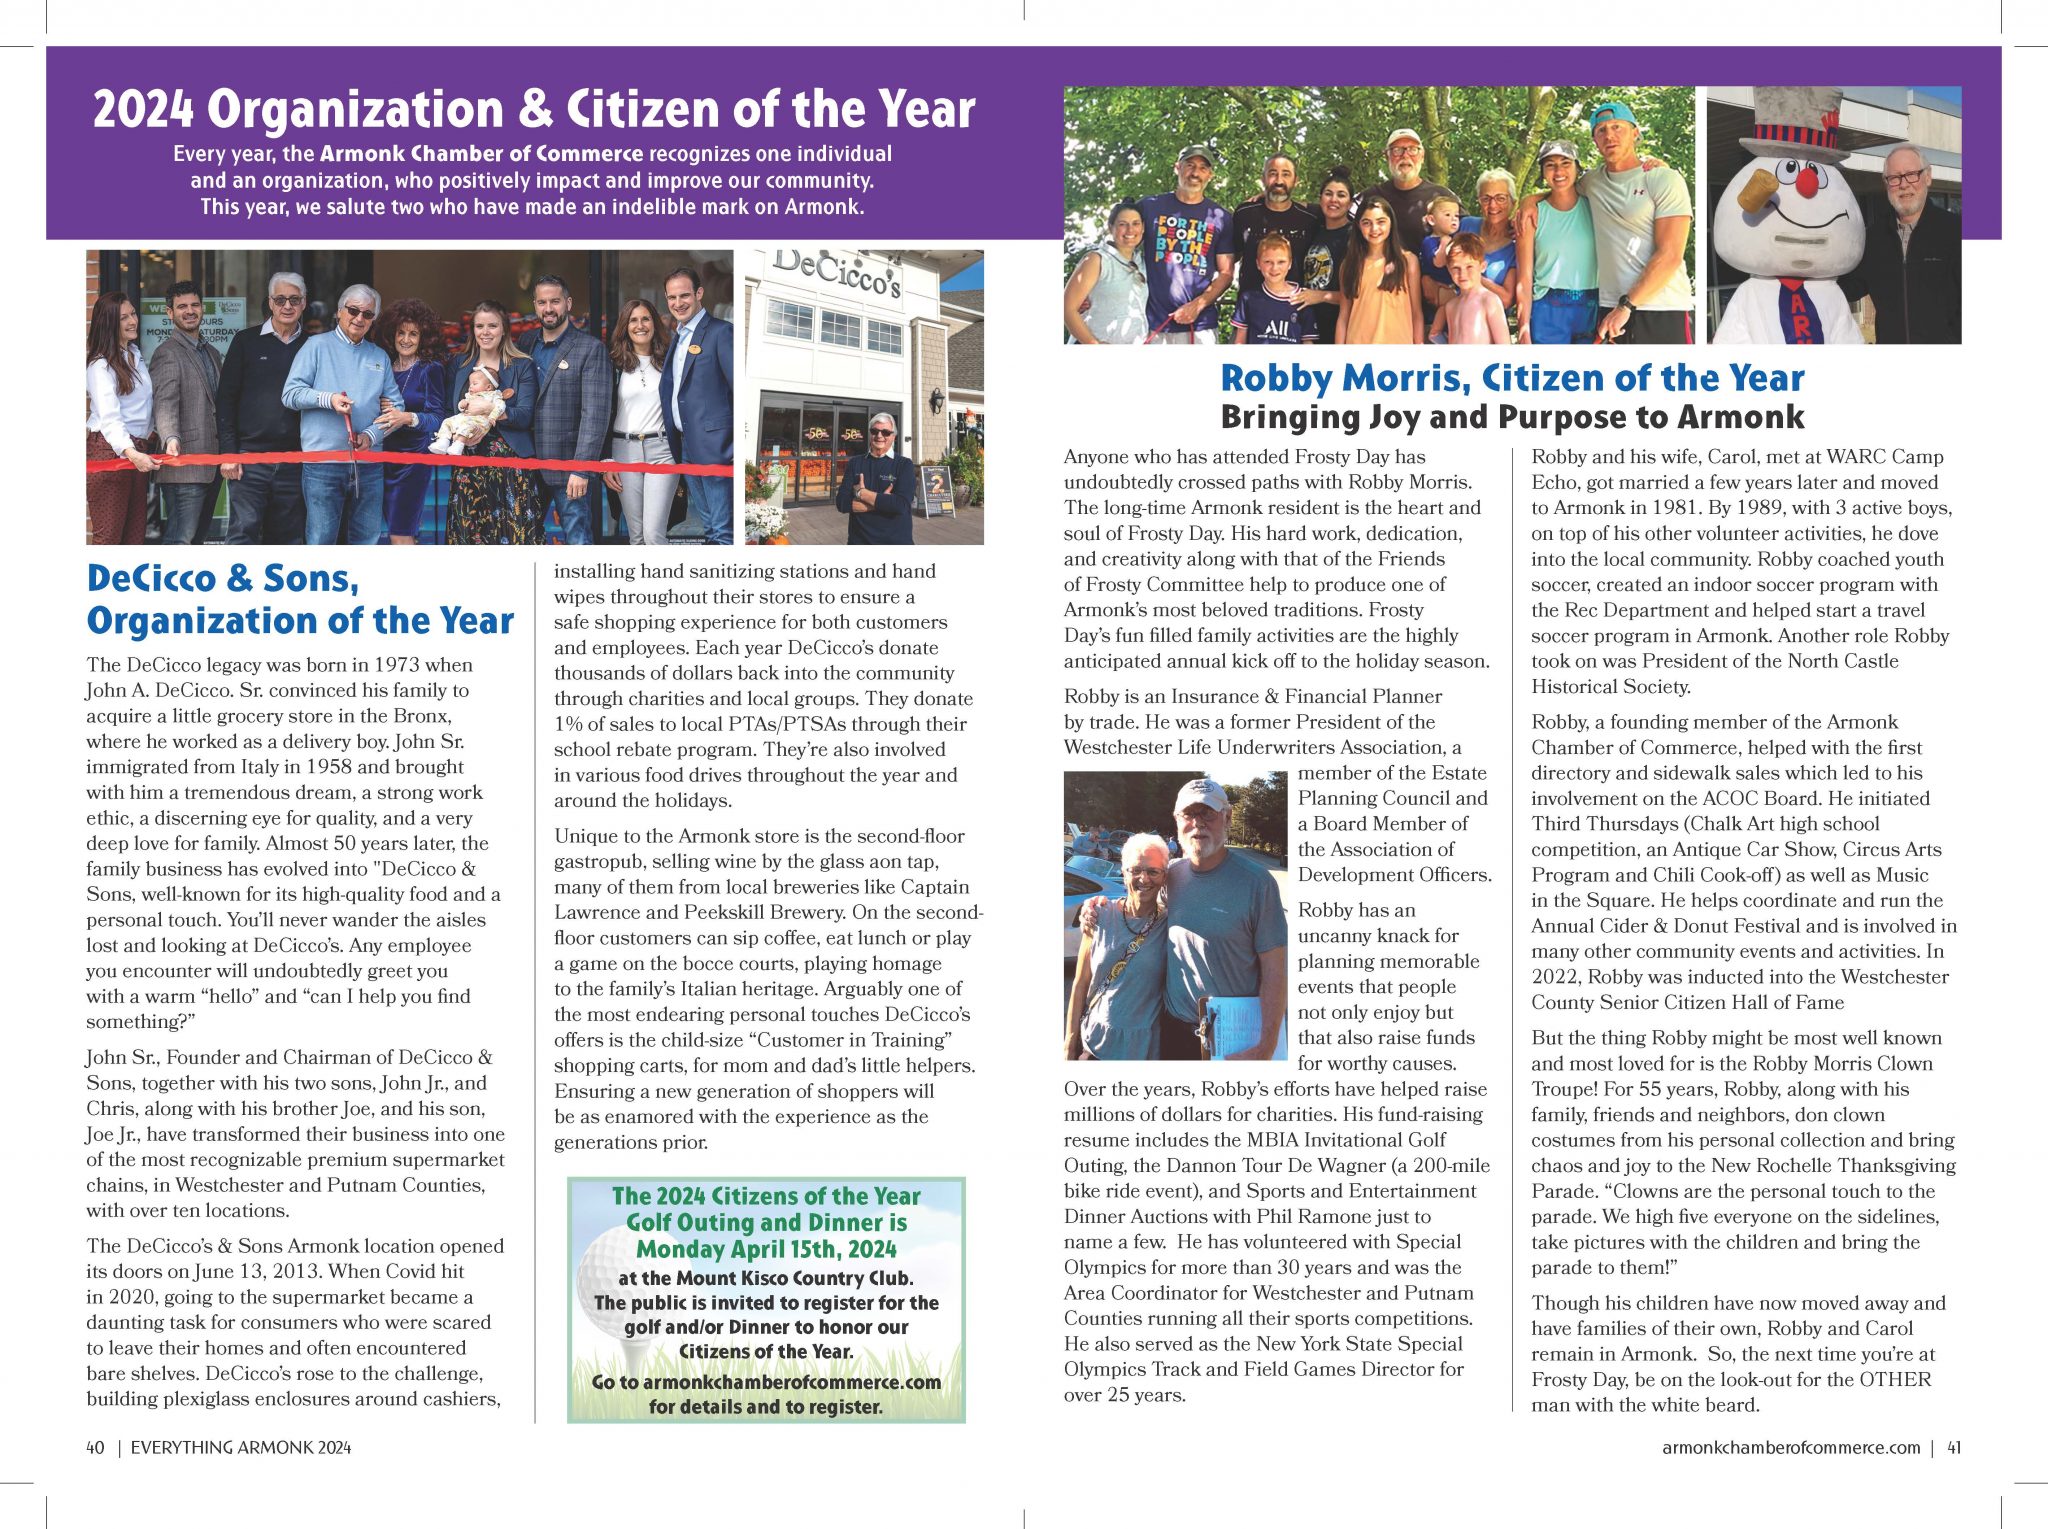 2024-Everything_Armonk-Citizens of Yr p40-41c